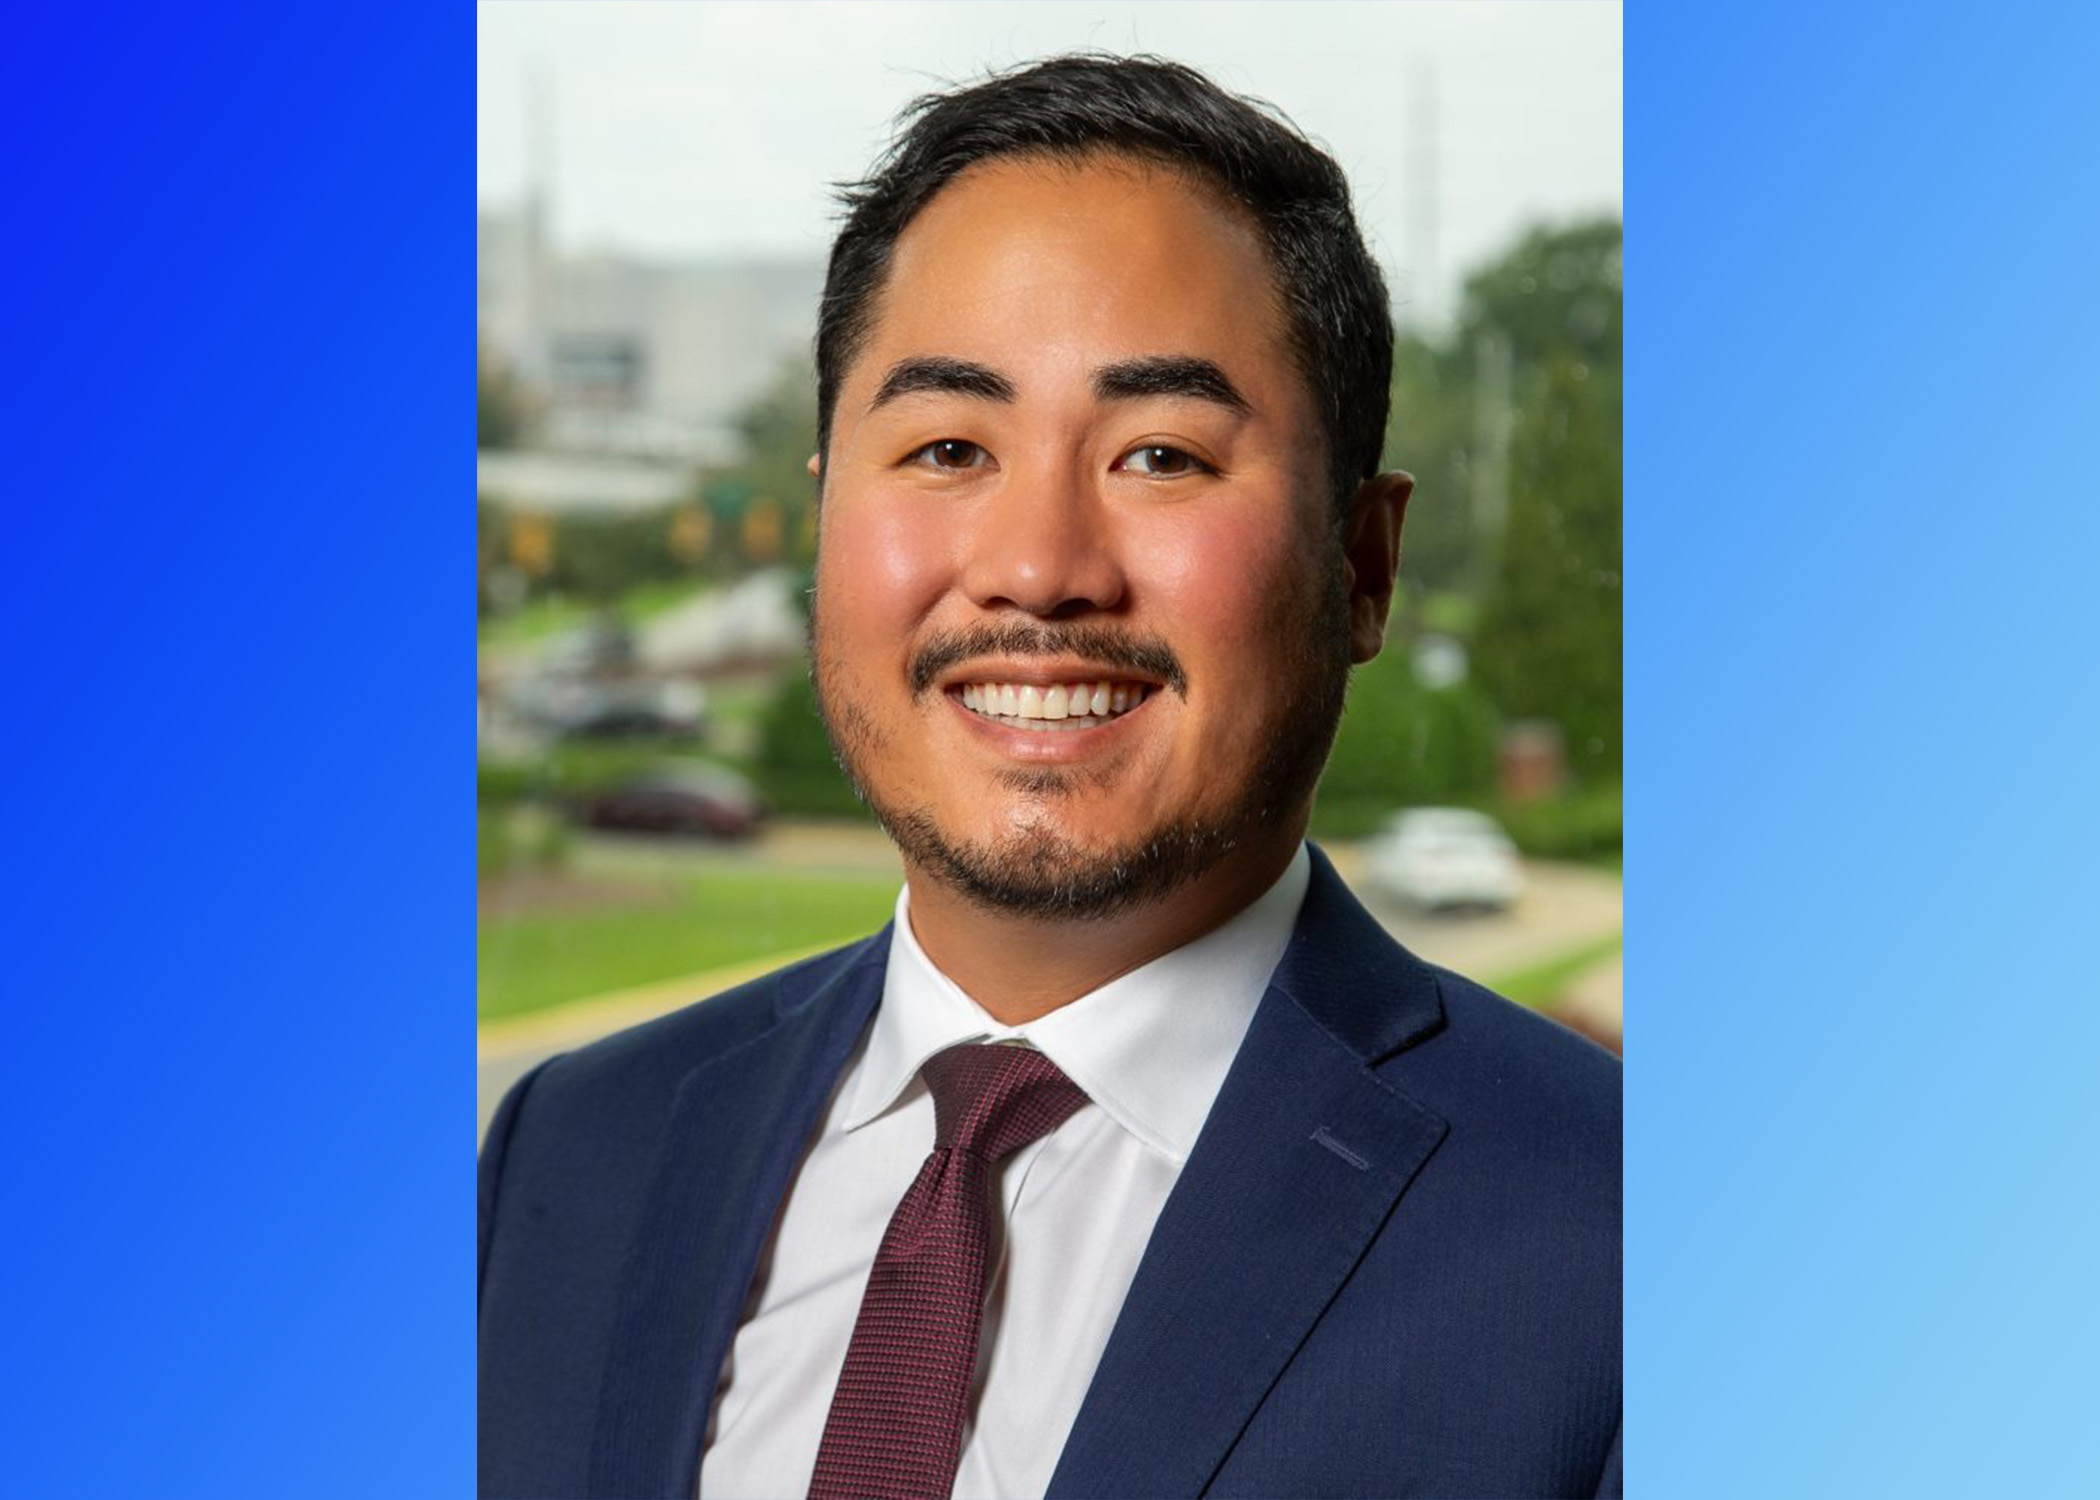 Nationally-renowned spine surgeon Dr. Daniel C. Kim joins Andrews Sports Medicine & Orthopaedic Center